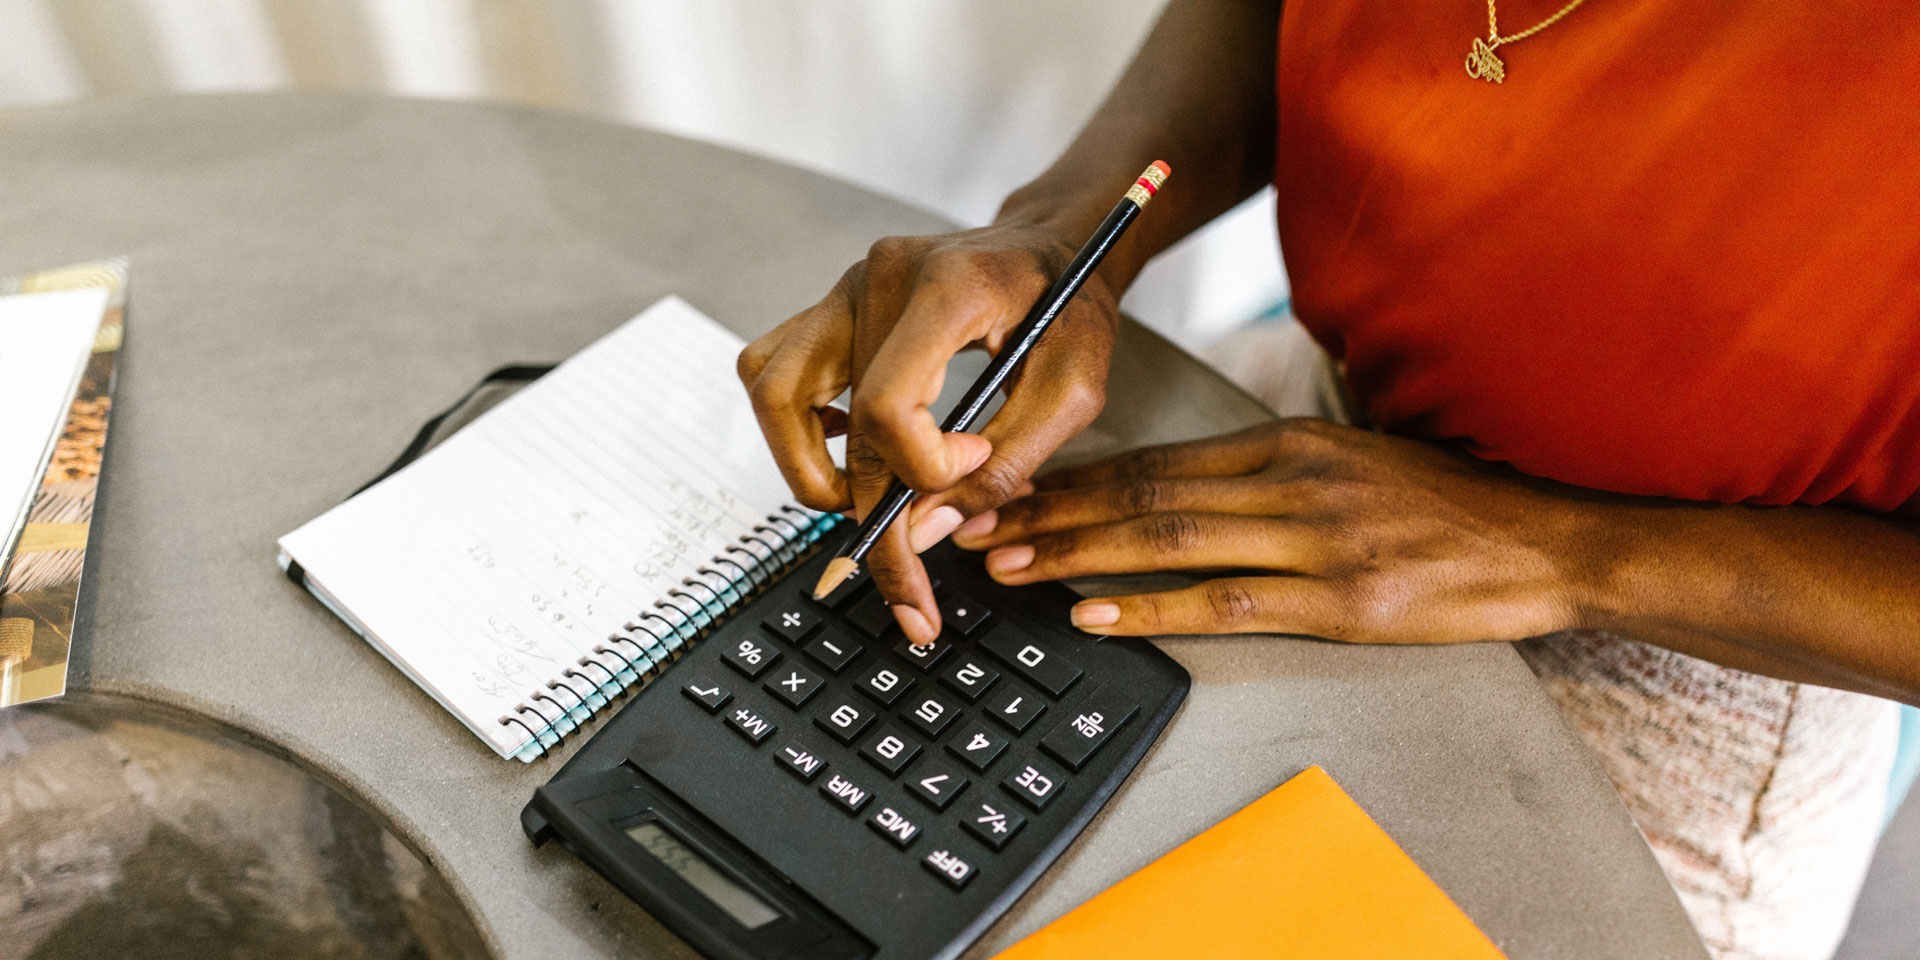 A young woman working on a calculator. Next to her is her budget diary.